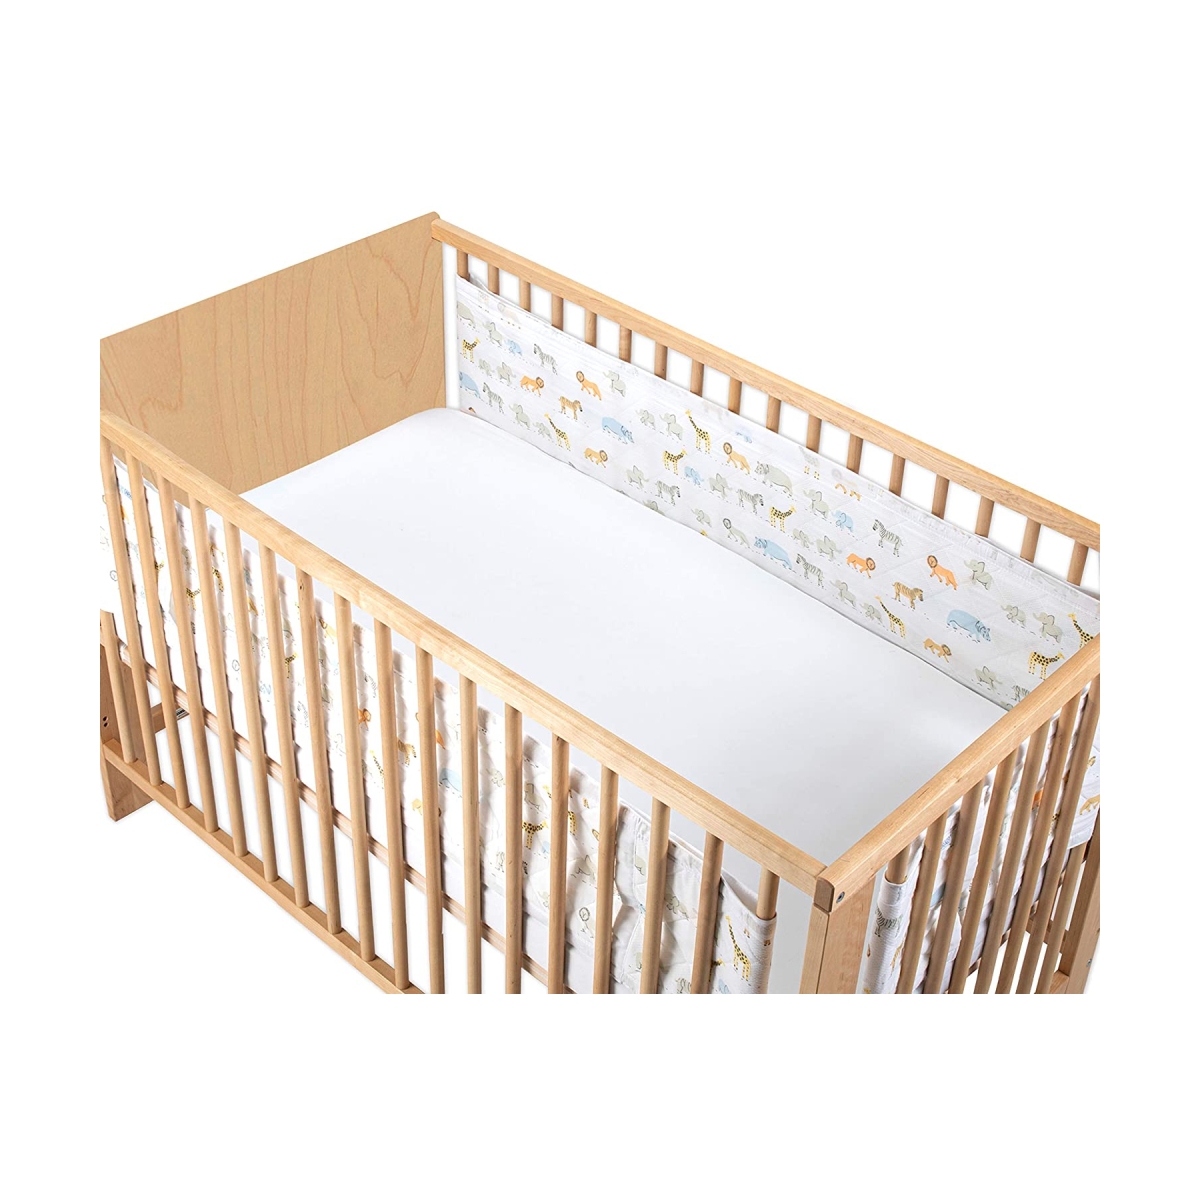 Airwrap 2 Sided Cot Protector